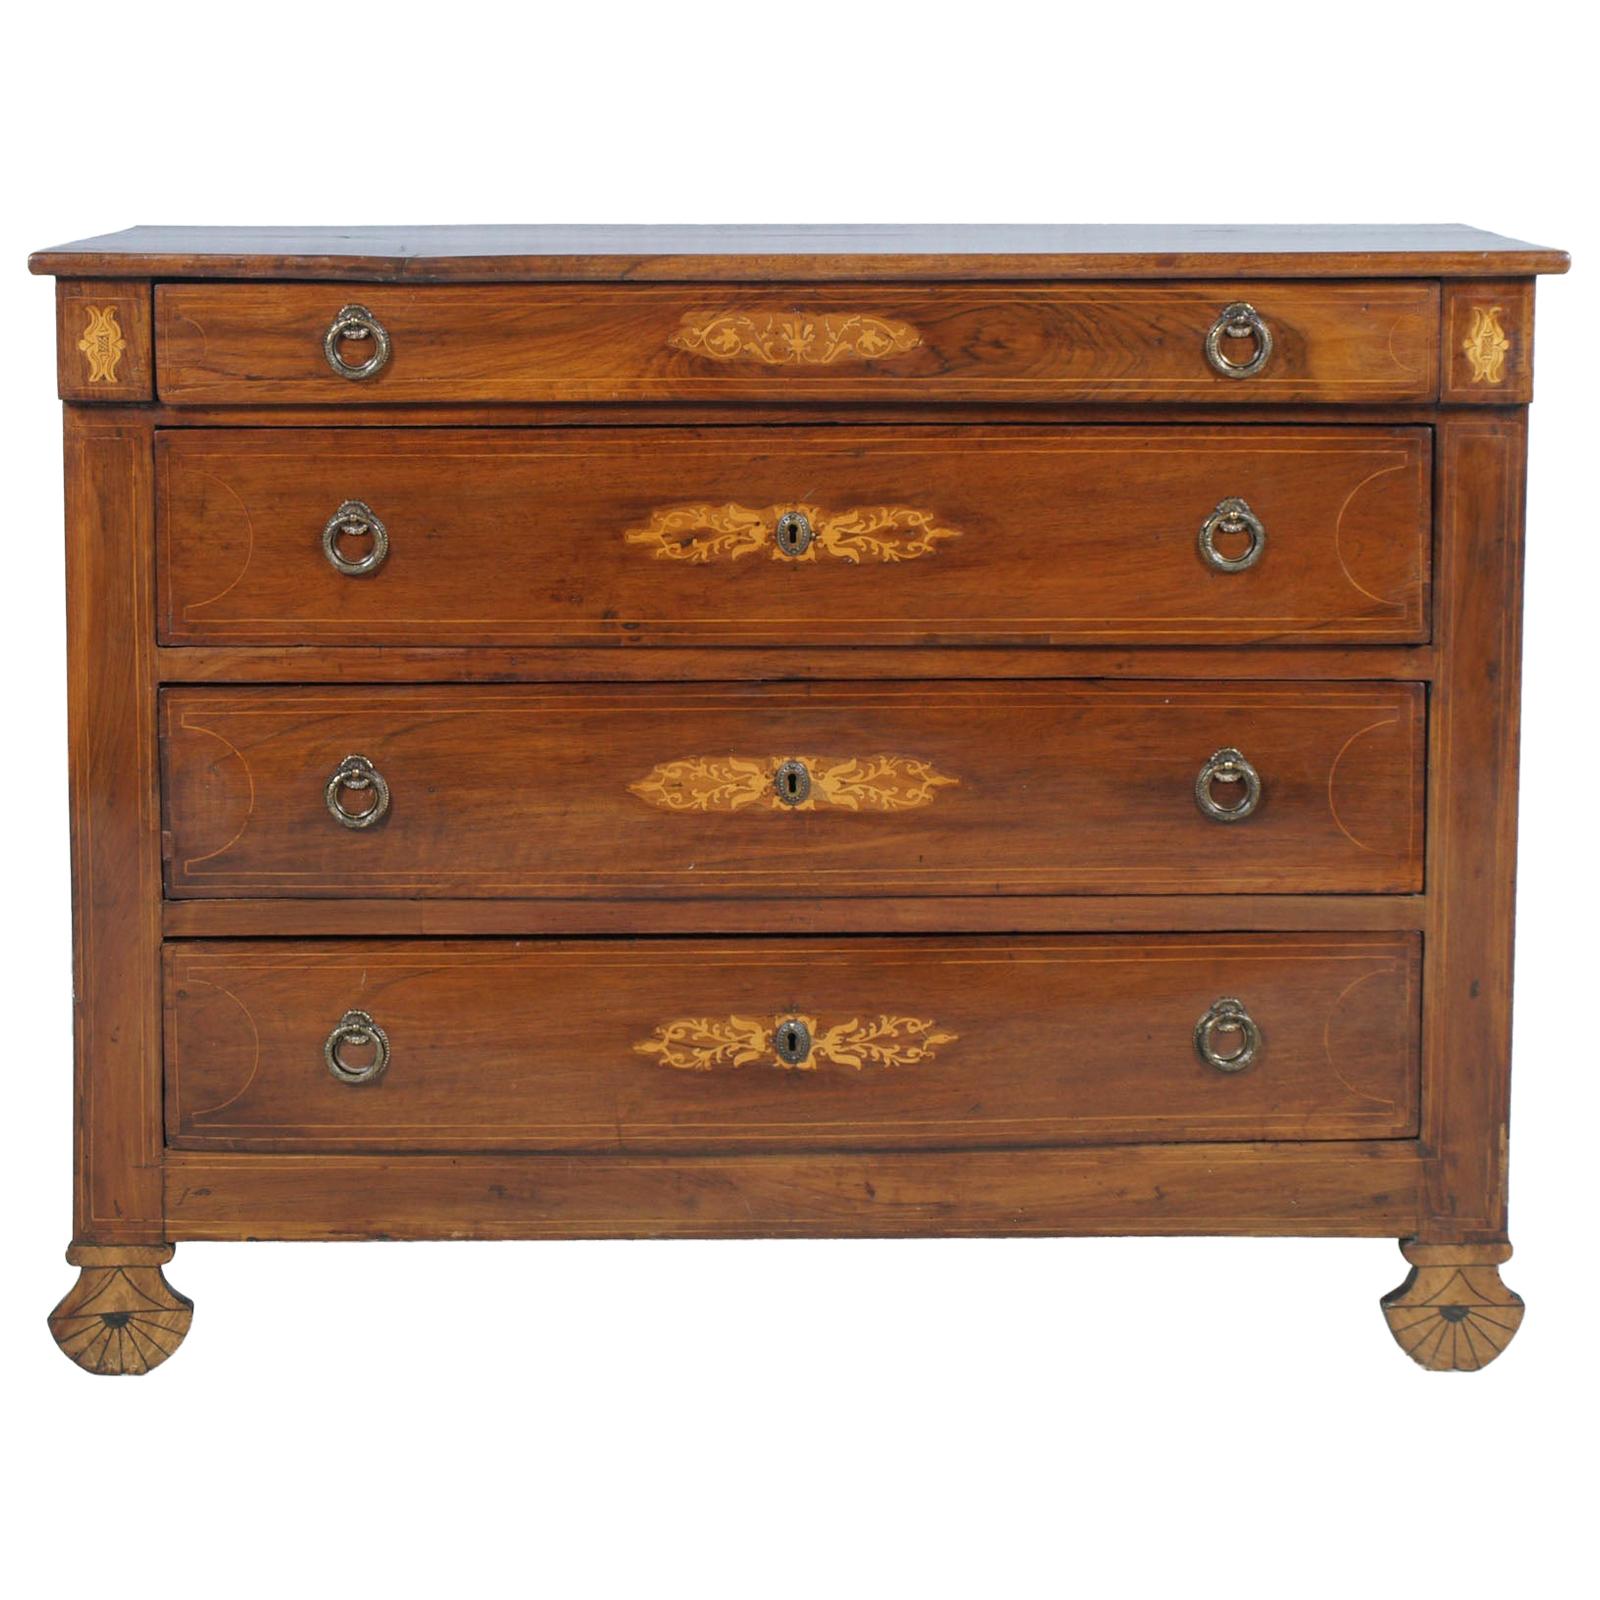 17th Century Lombard-Piedmont Area, Chest of Drawers, Inlaid Walnut Wax-Polished